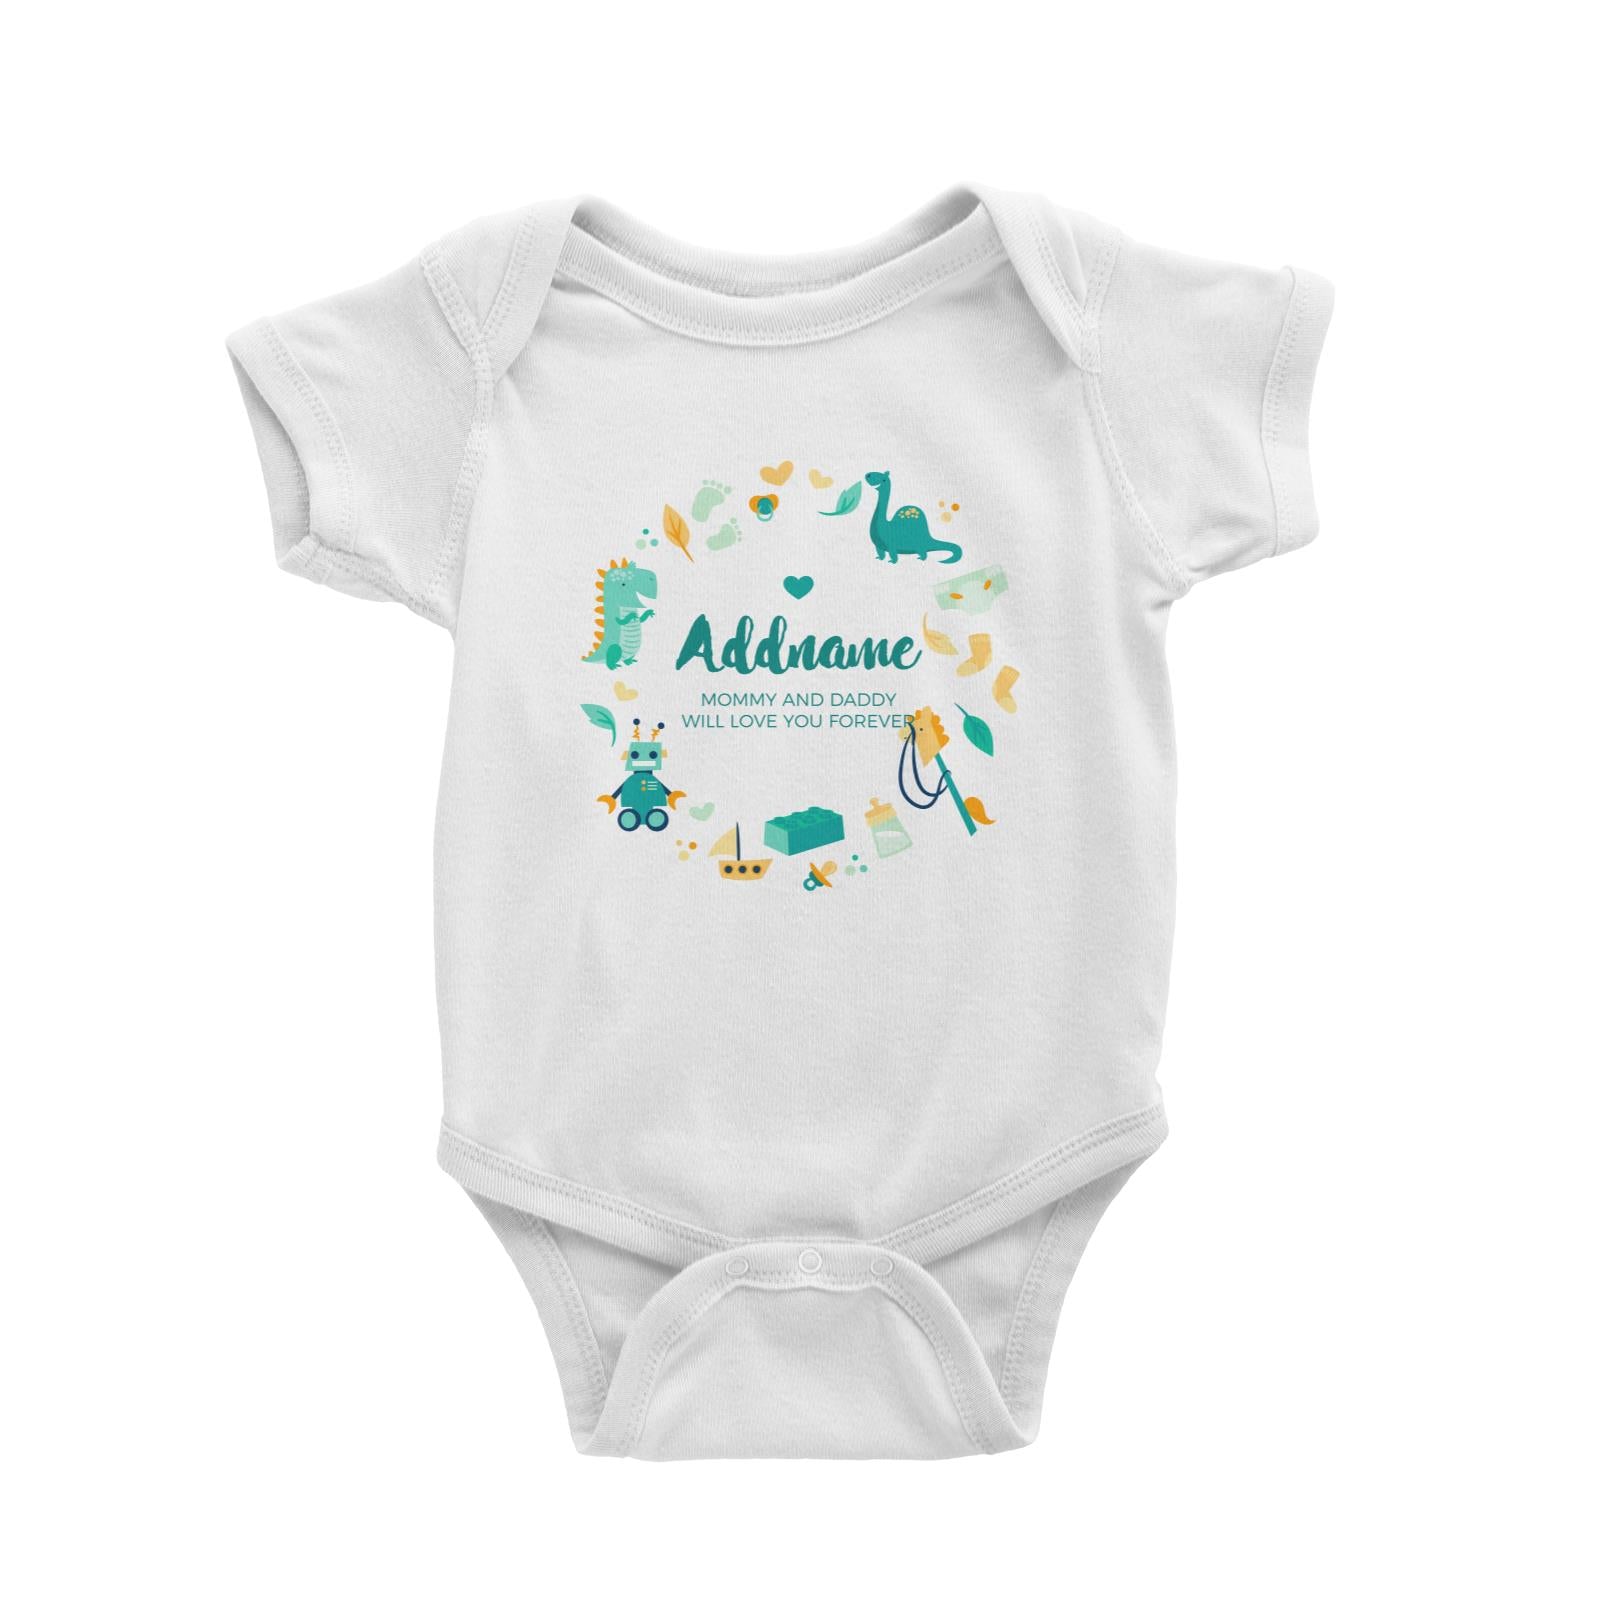 Cute Dinosaurs and Toys Elements Personalizable with Name and Text Baby Romper